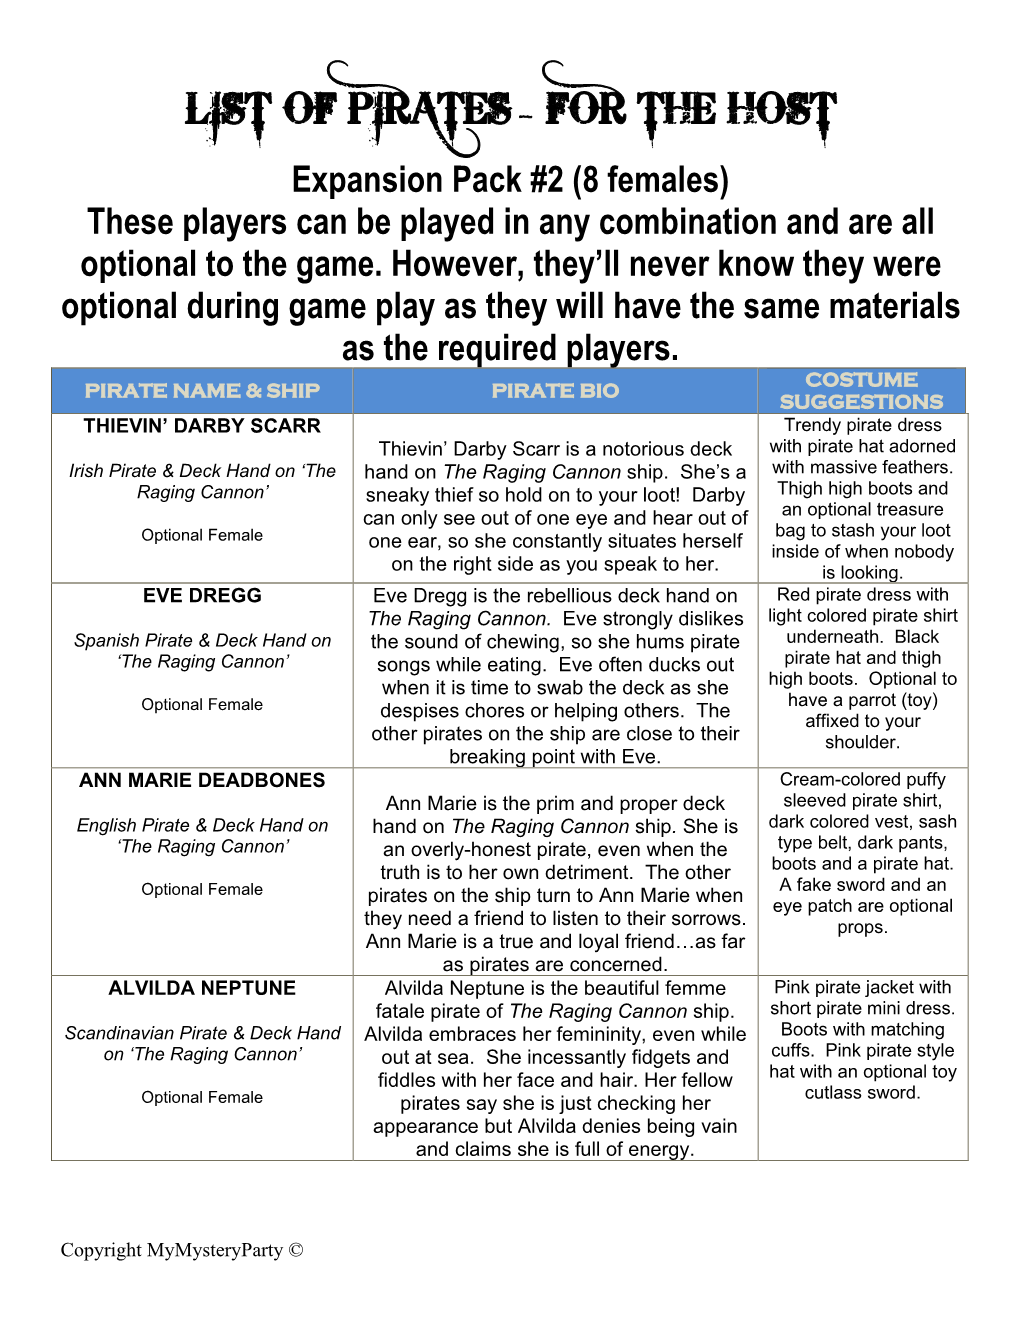 LIST of PIRATES – for the HOST Expansion Pack #2 (8 Females) These Players Can Be Played in Any Combination and Are All Optional to the Game